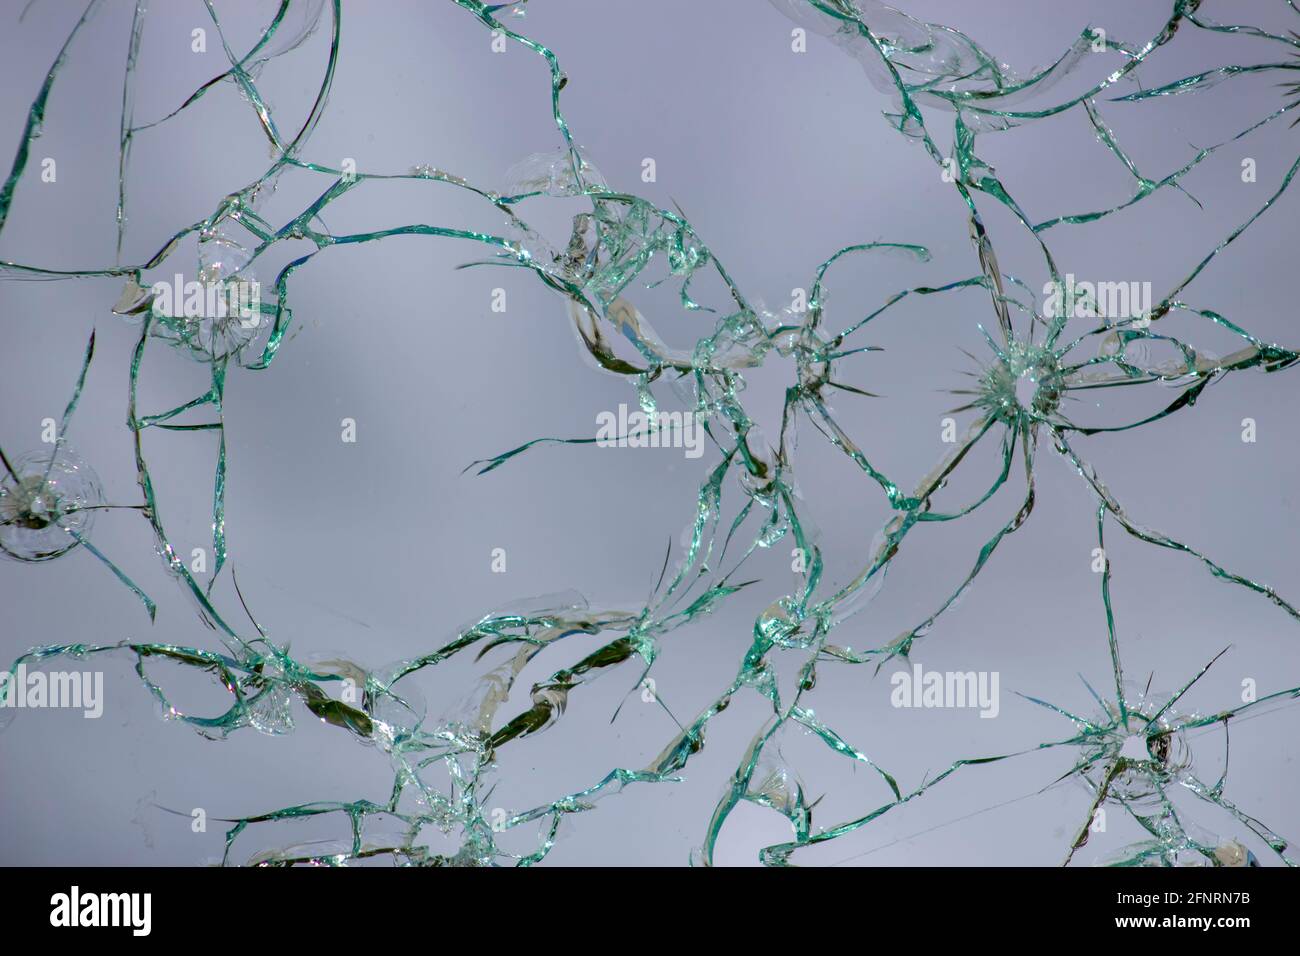 Cracked glass, texture of broken shots of glass on a white background Stock Photo